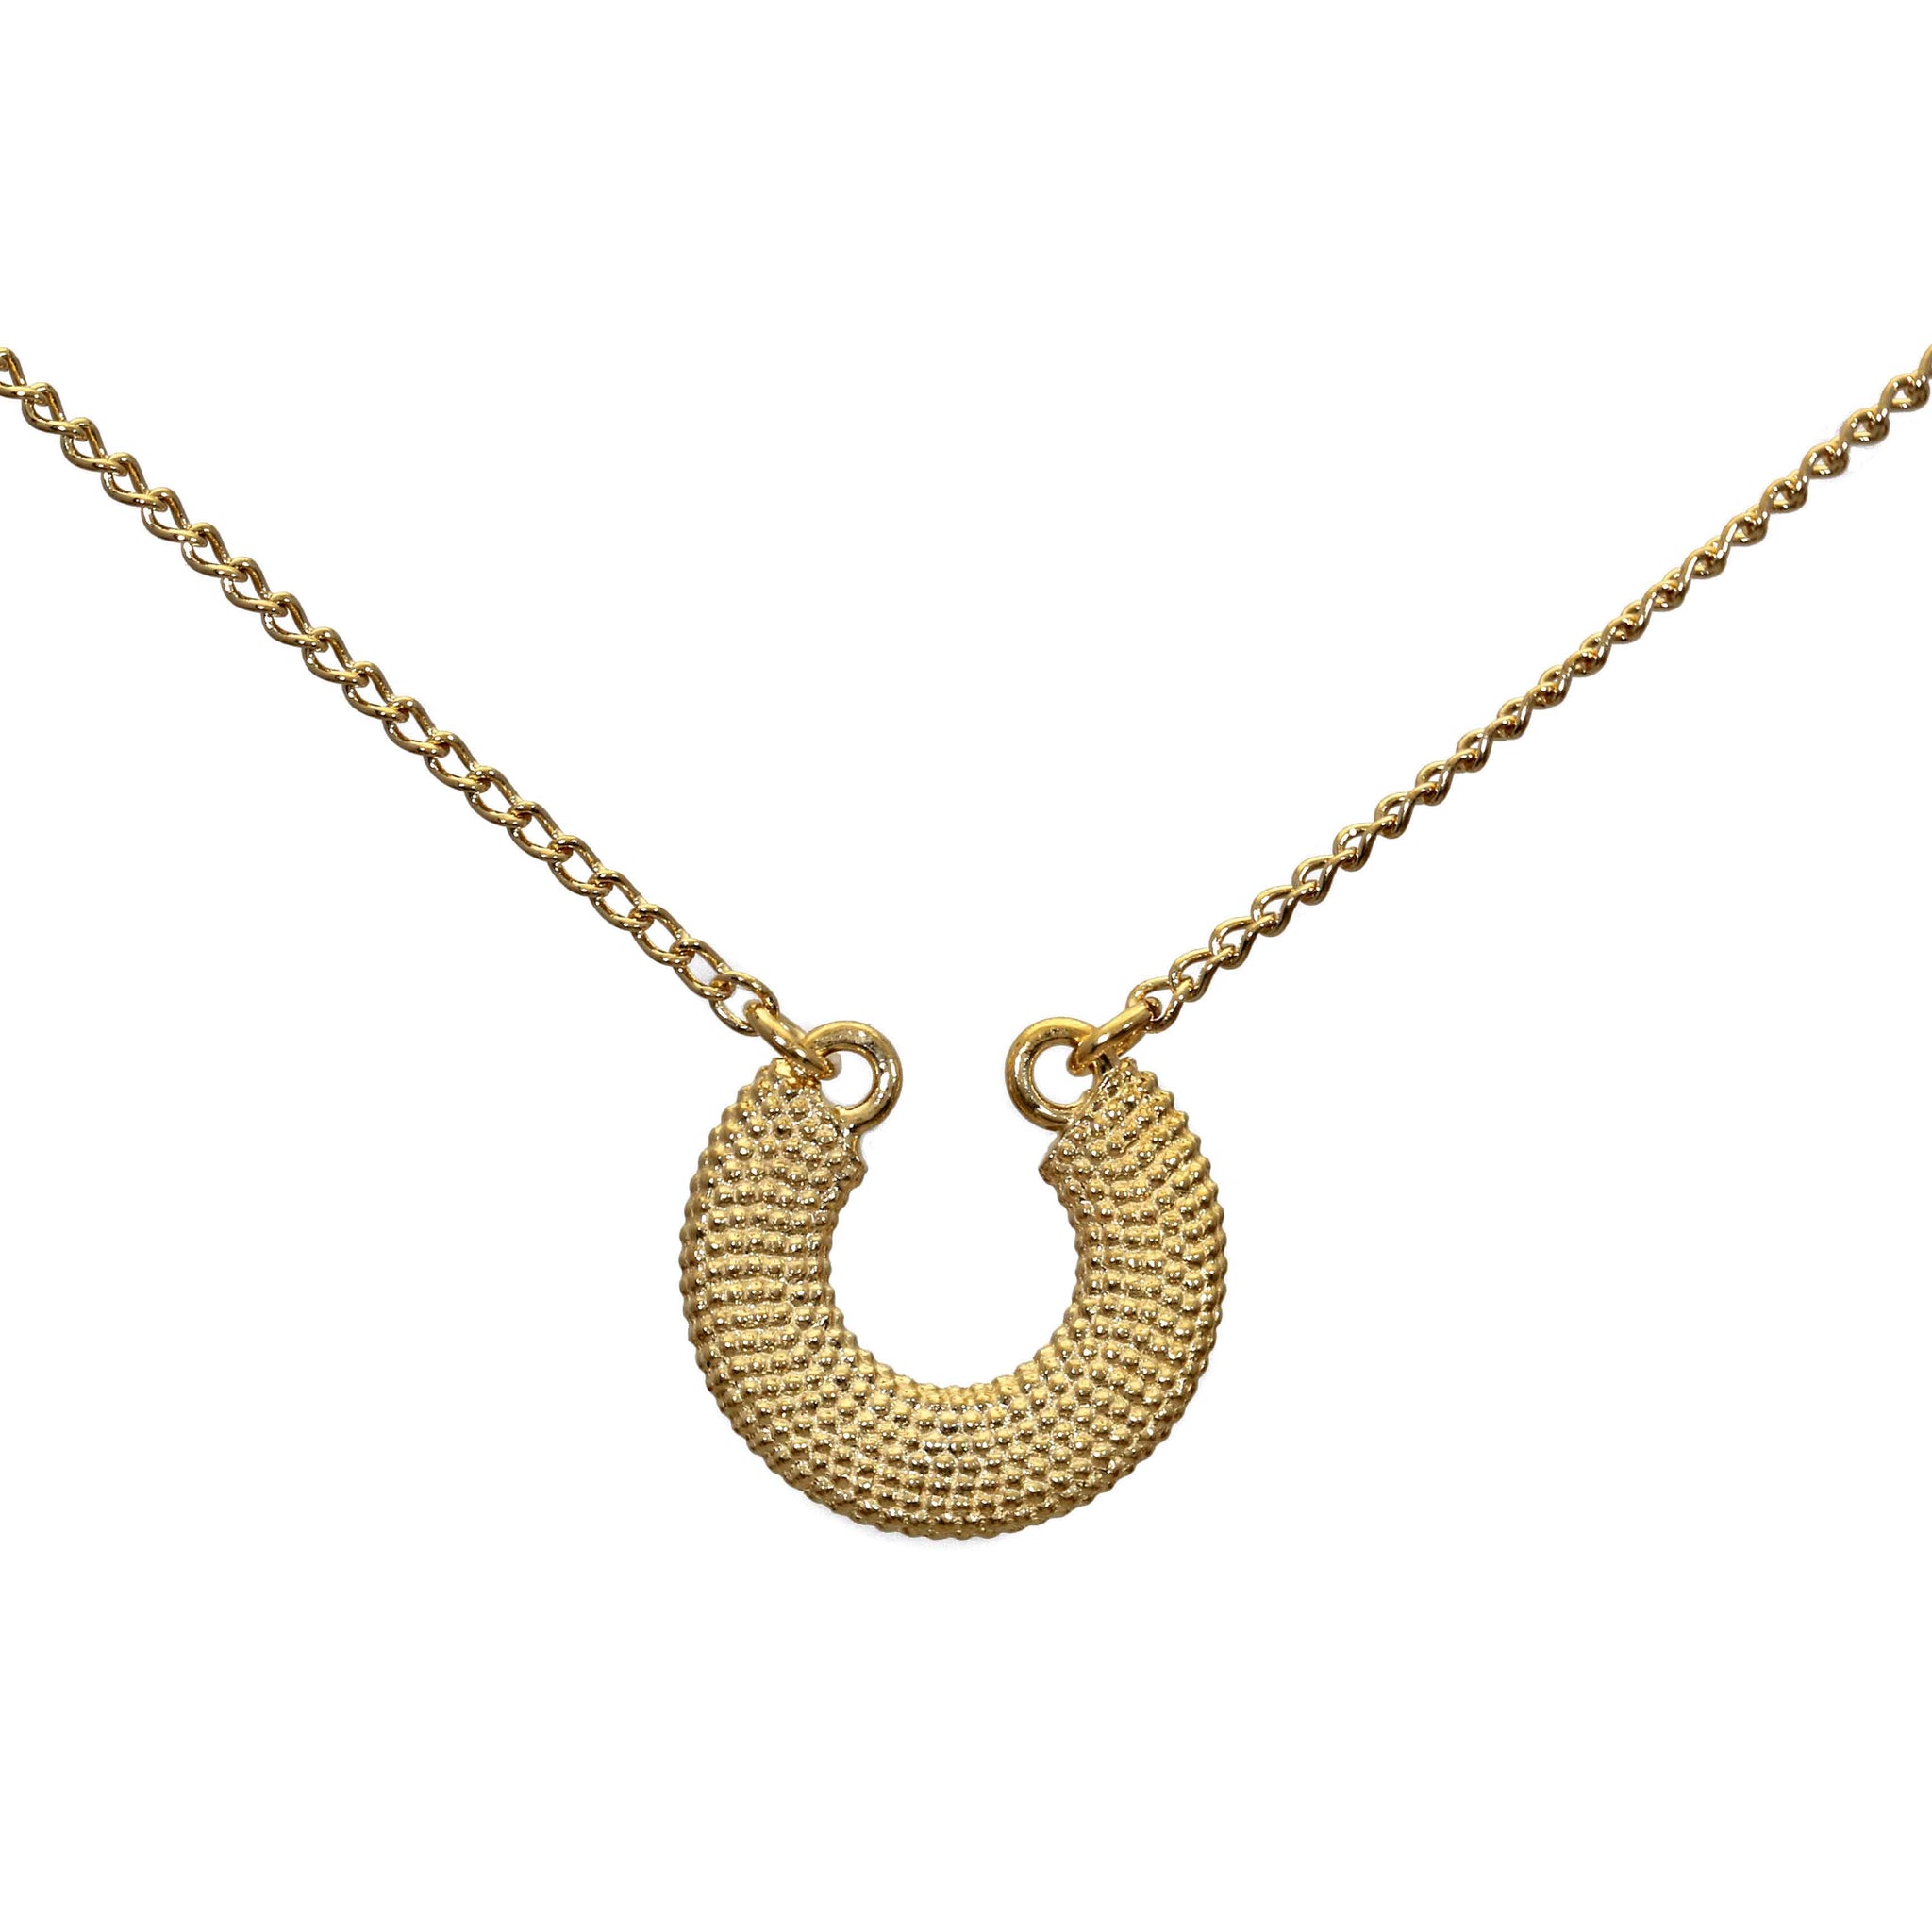 Weol textured yellow gold lucky horseshoe pendant necklace